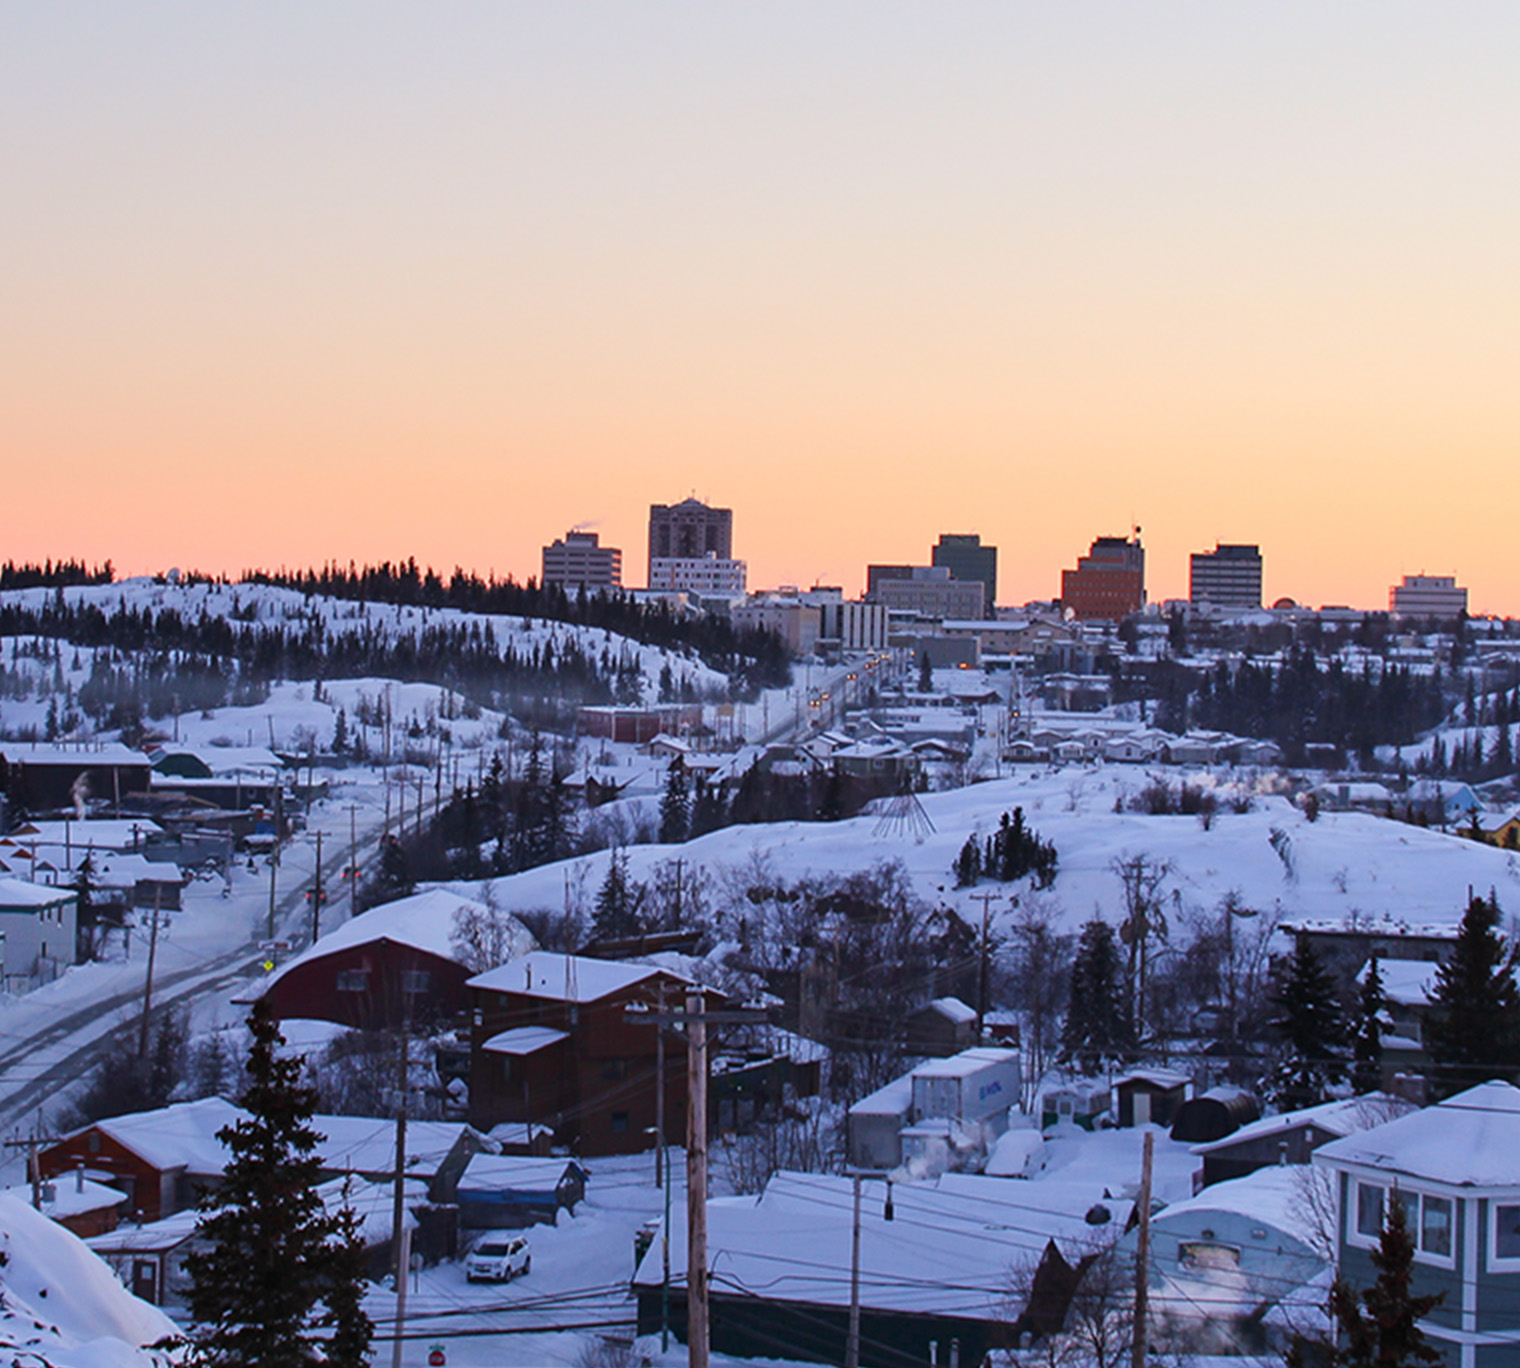 A view of the Yellowknife cityscape at sunset